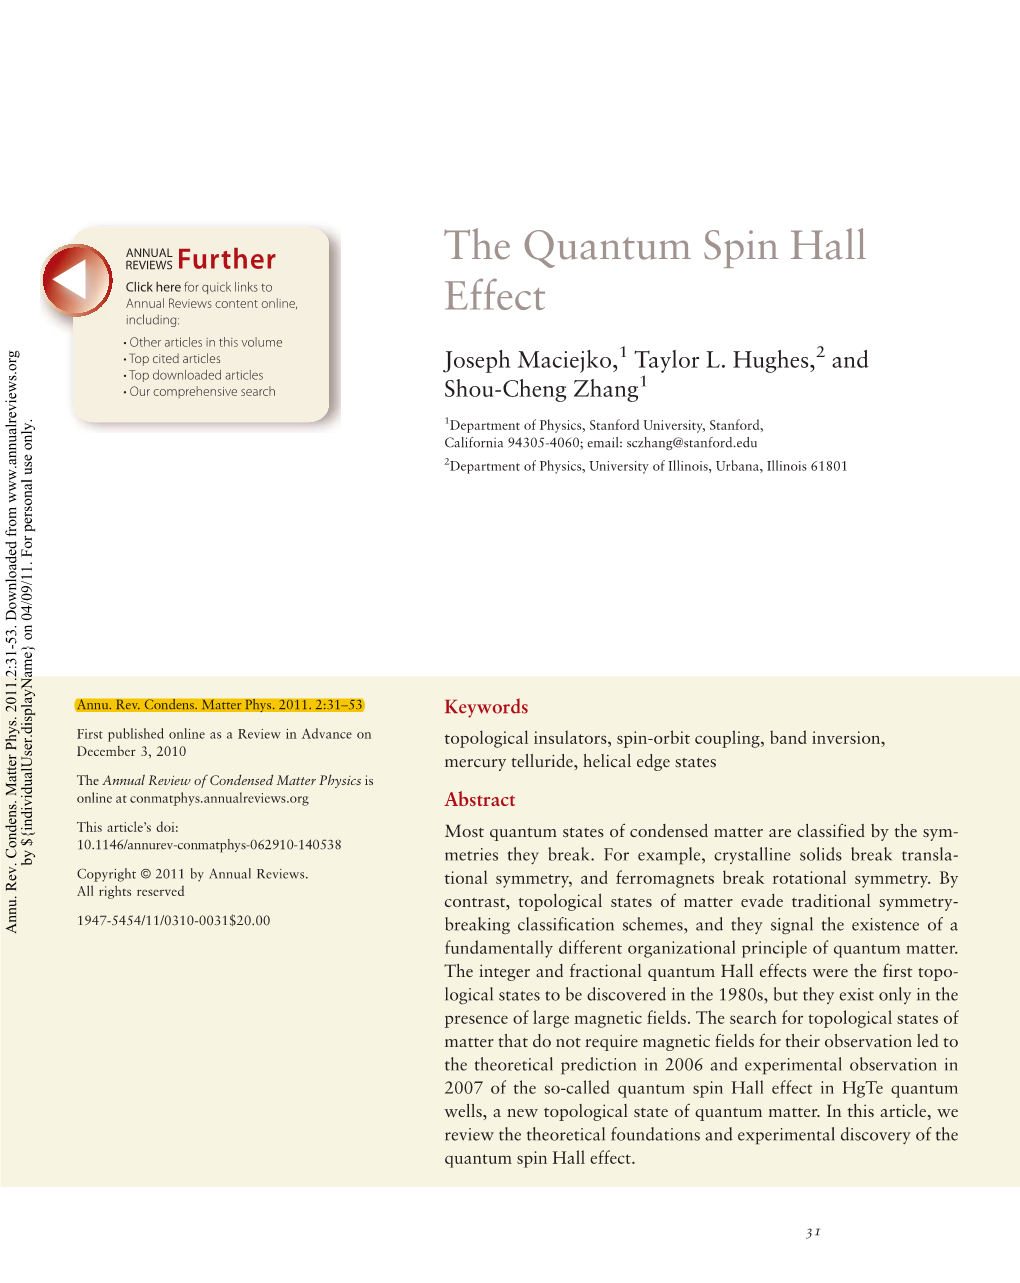 The Quantum Spin Hall Effect